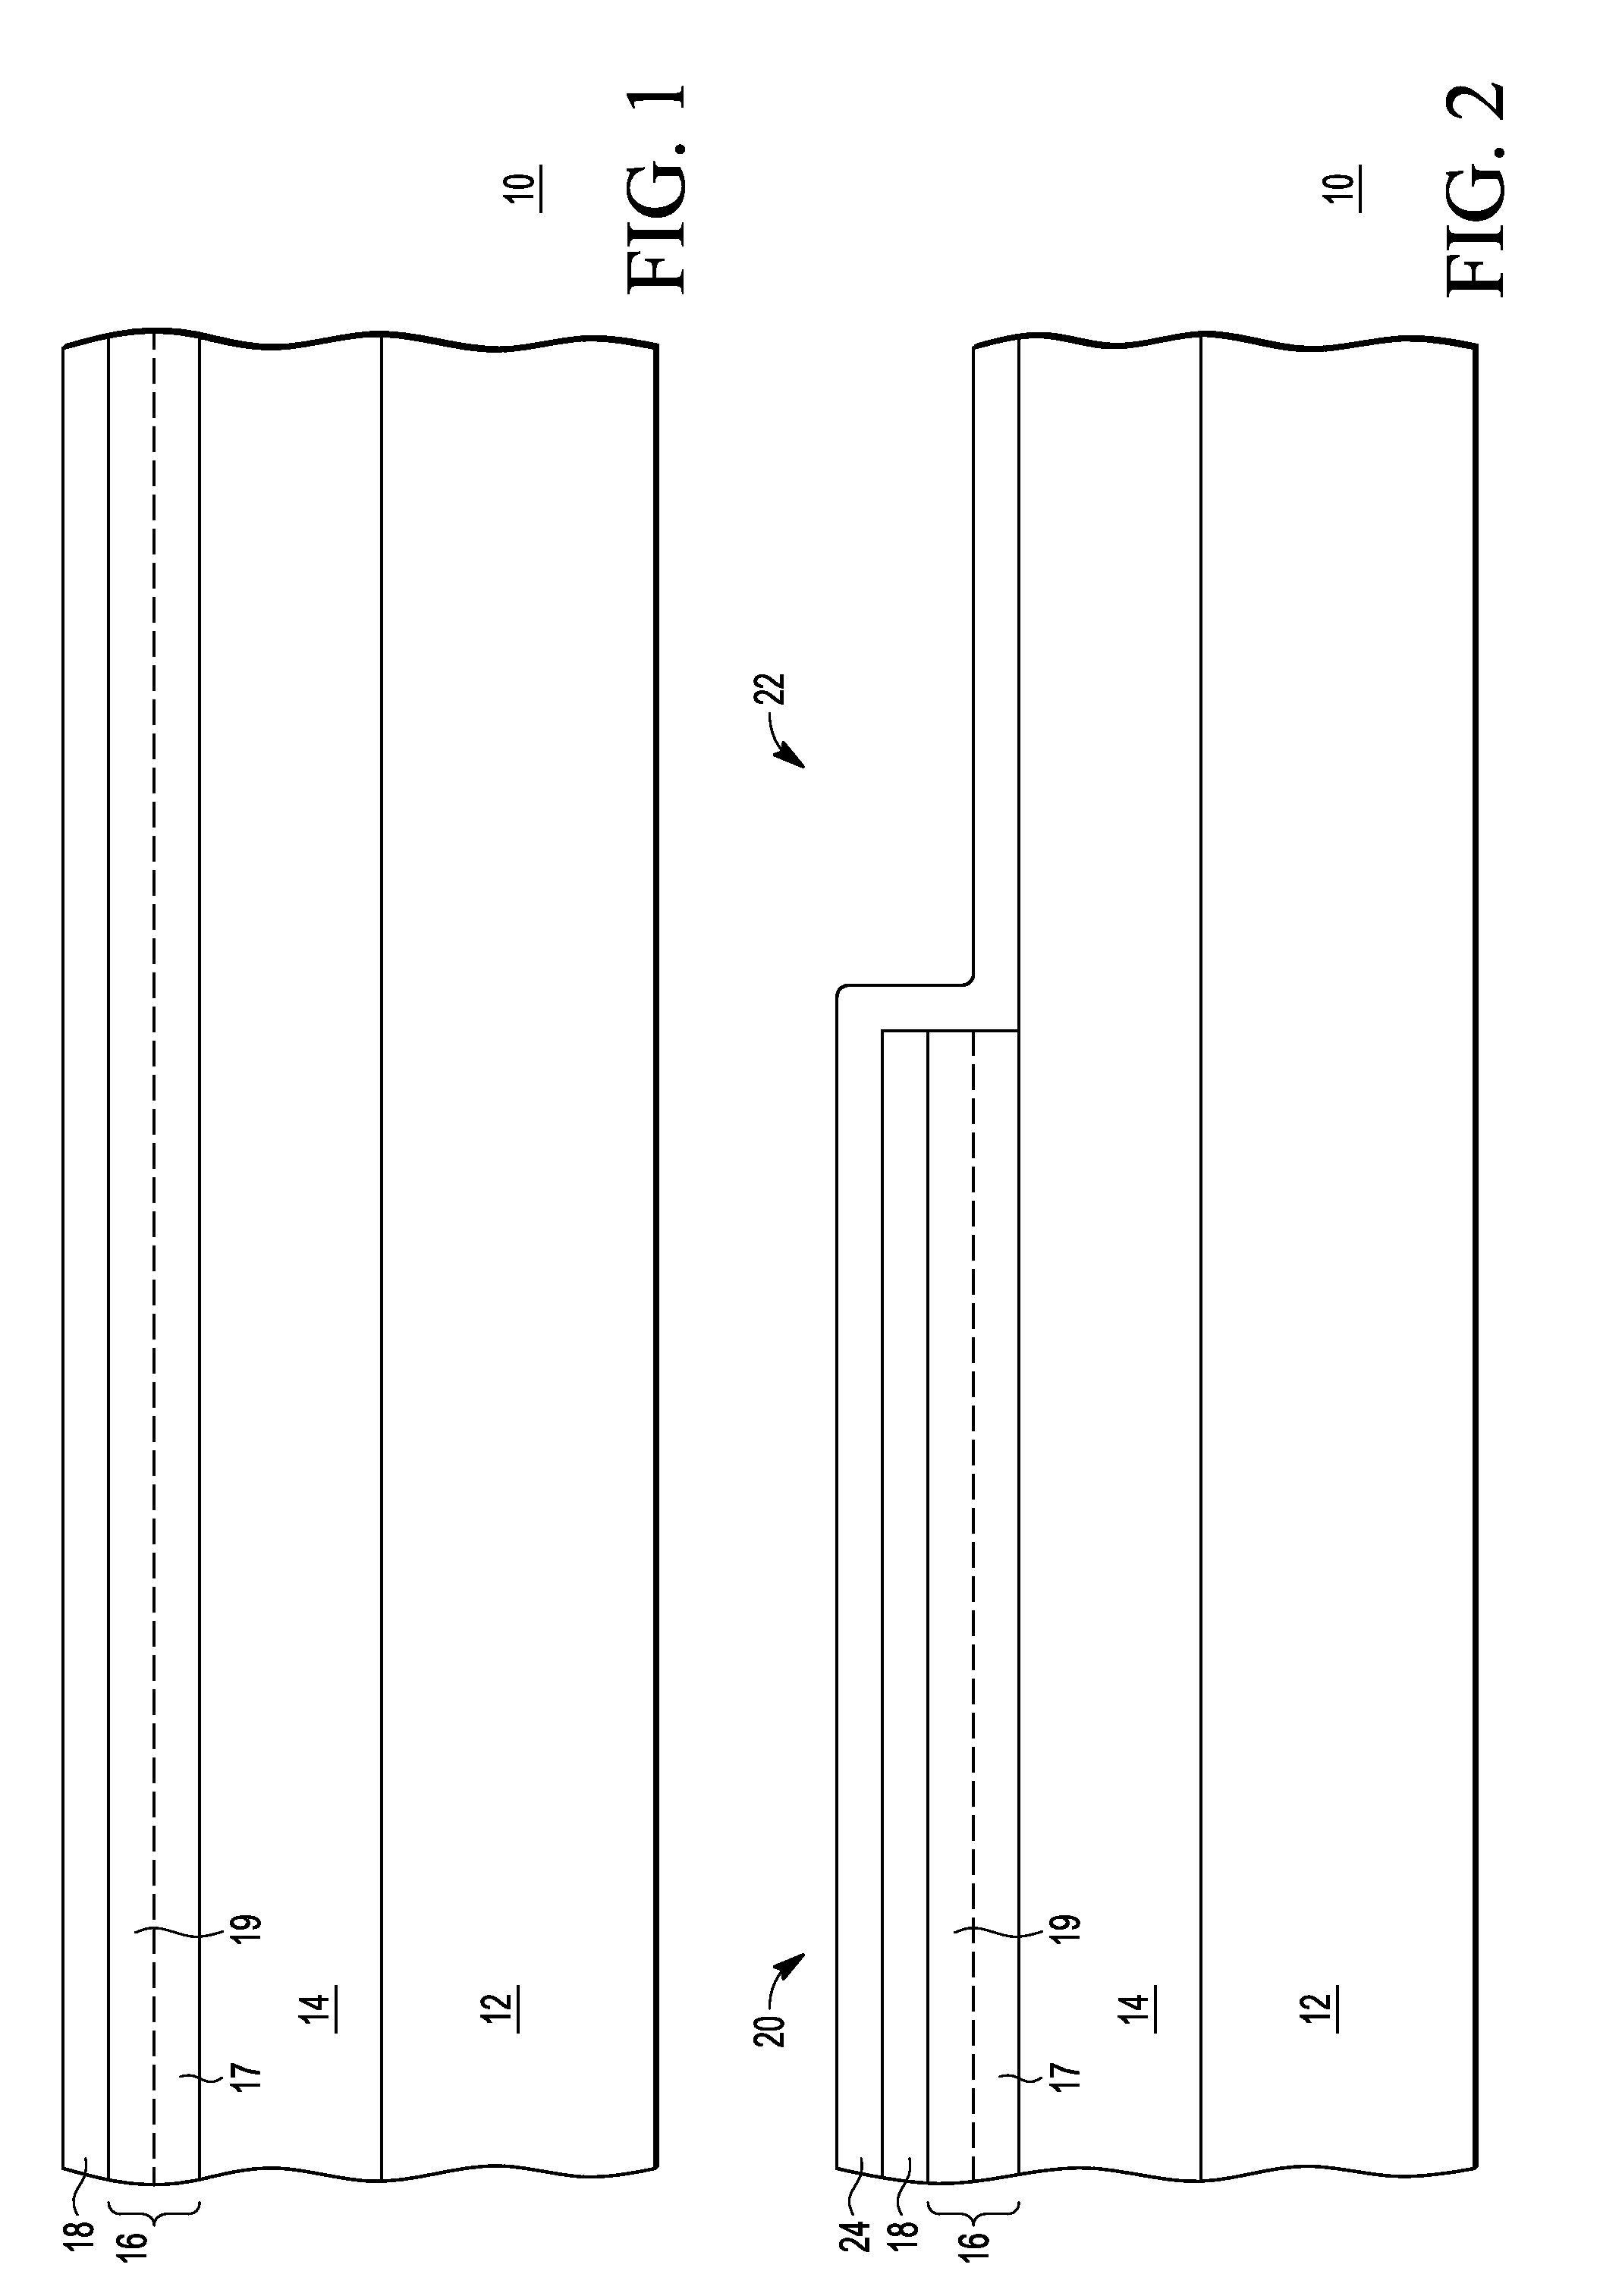 Integrated circuit having a bulk acoustic wave device and a transistor